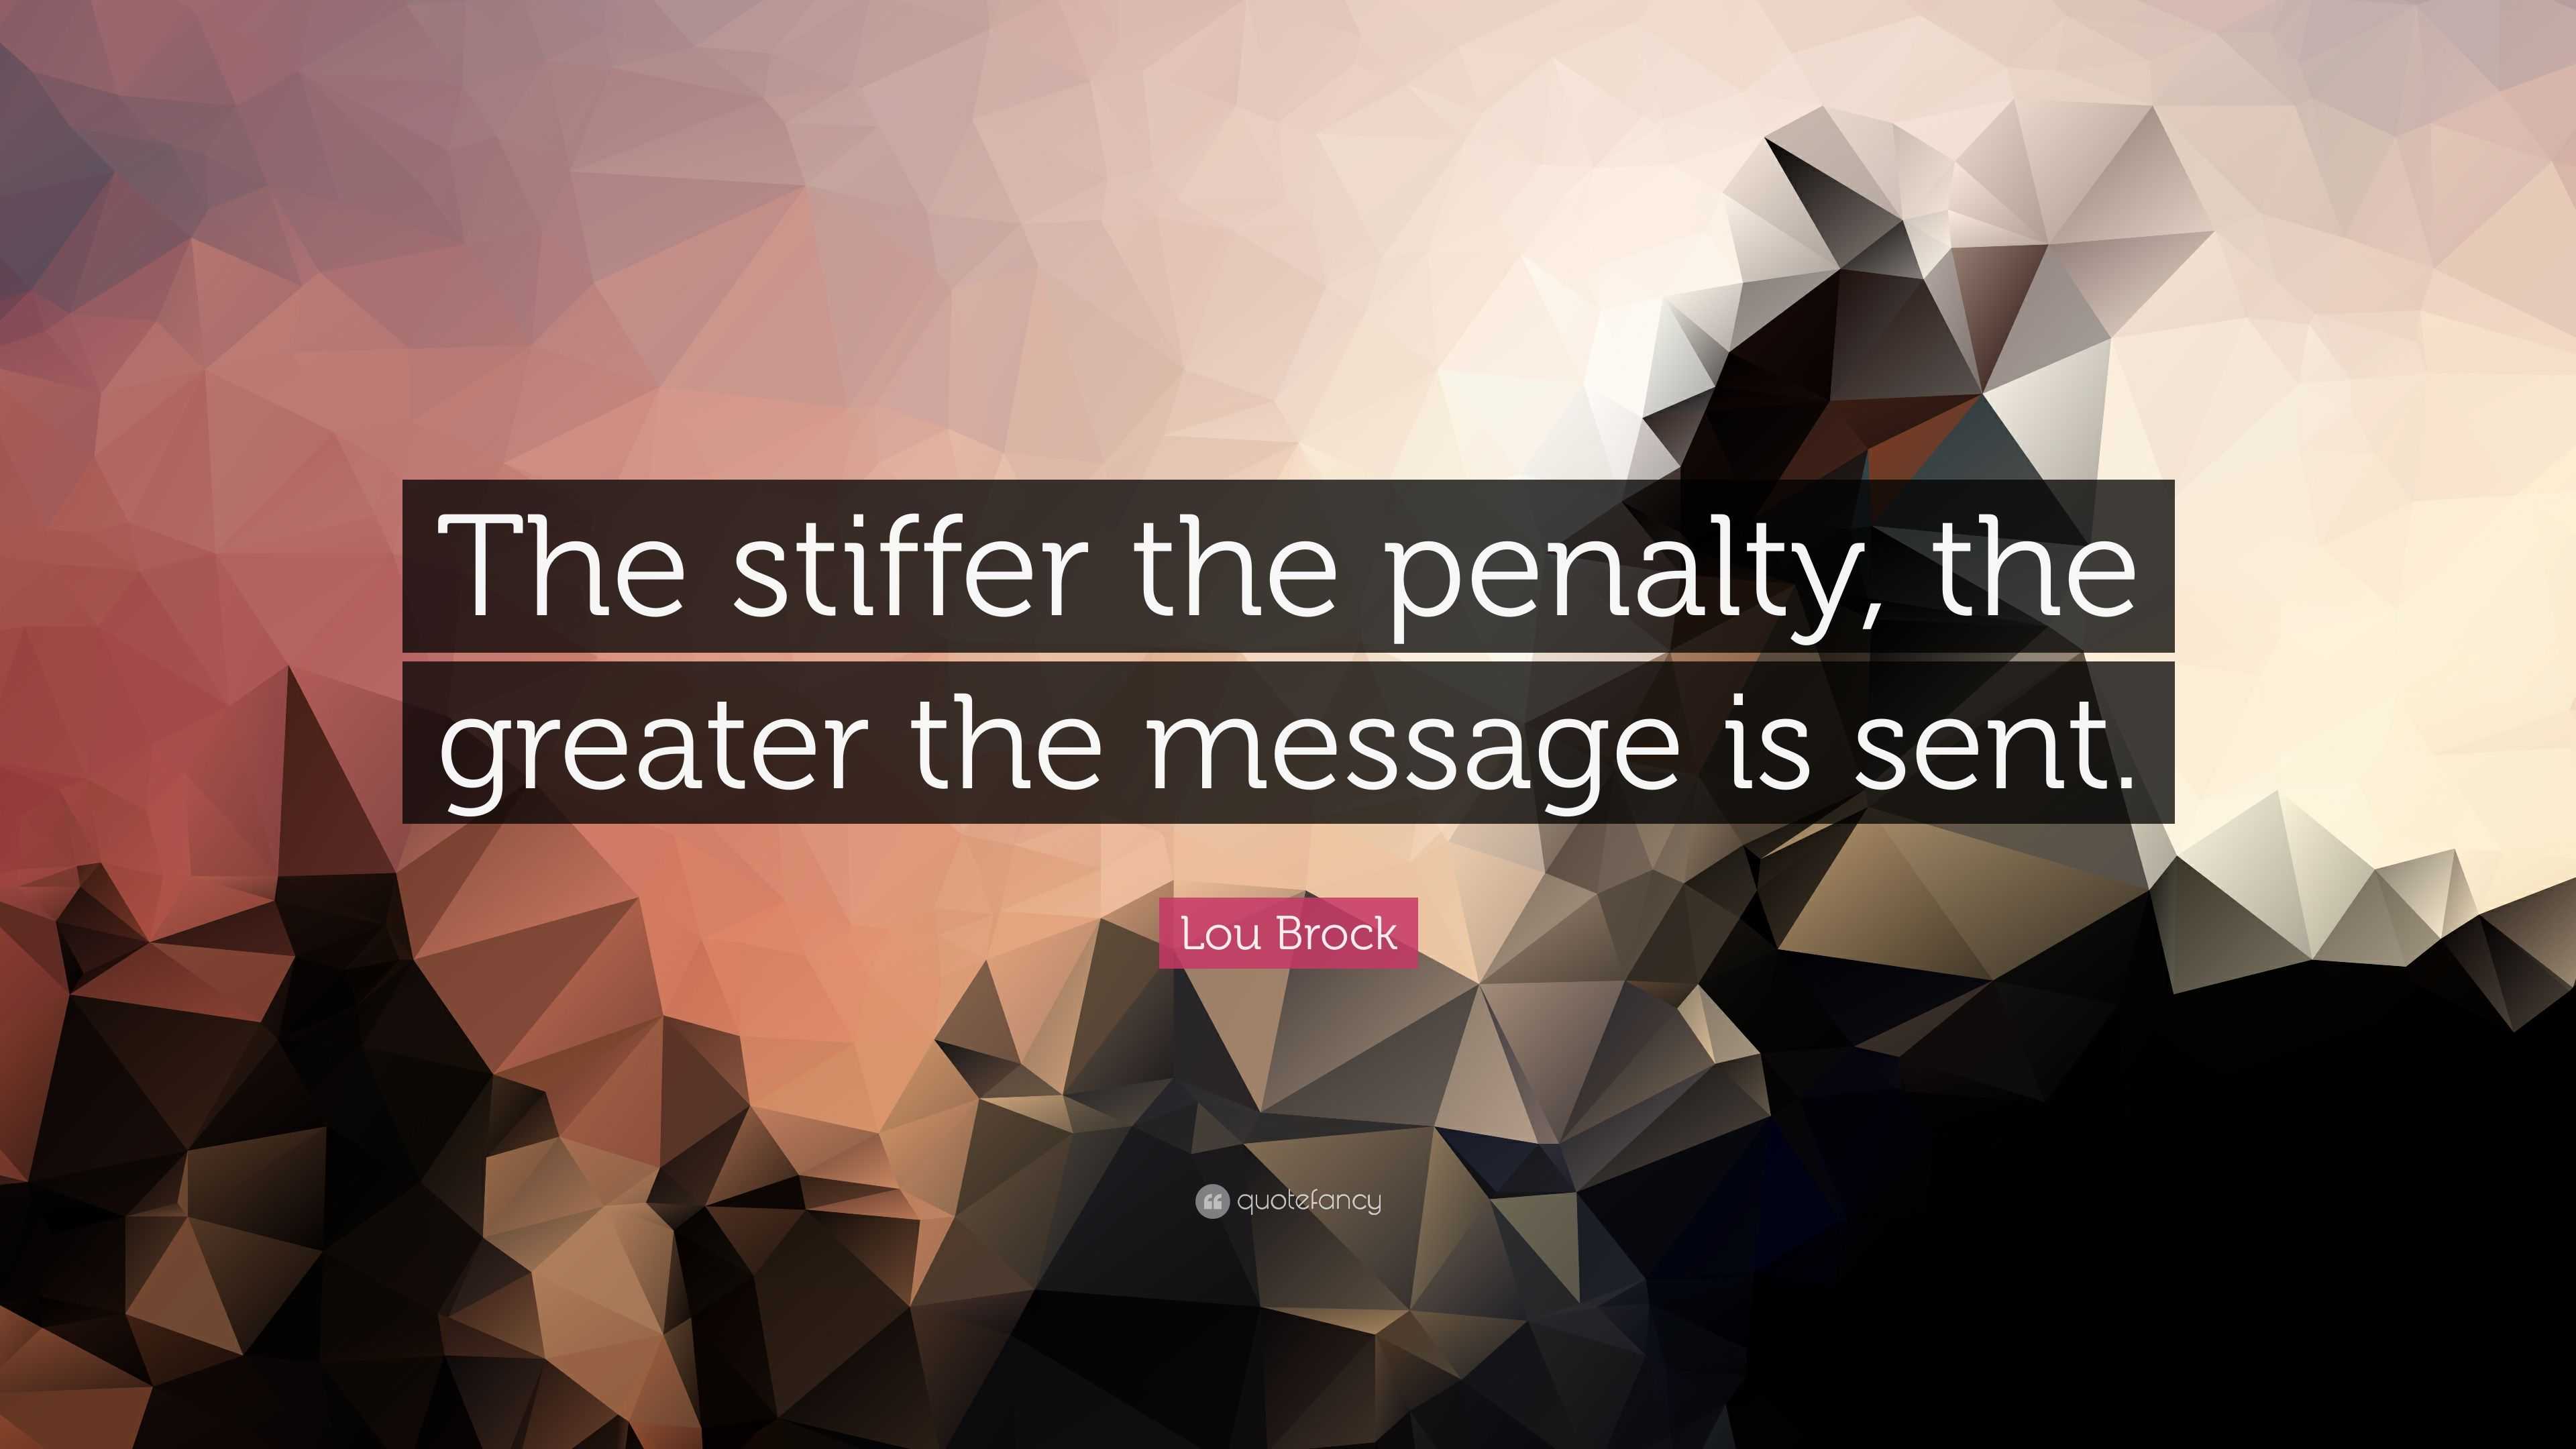 Lou Brock Quote: “The stiffer the penalty, the greater the message